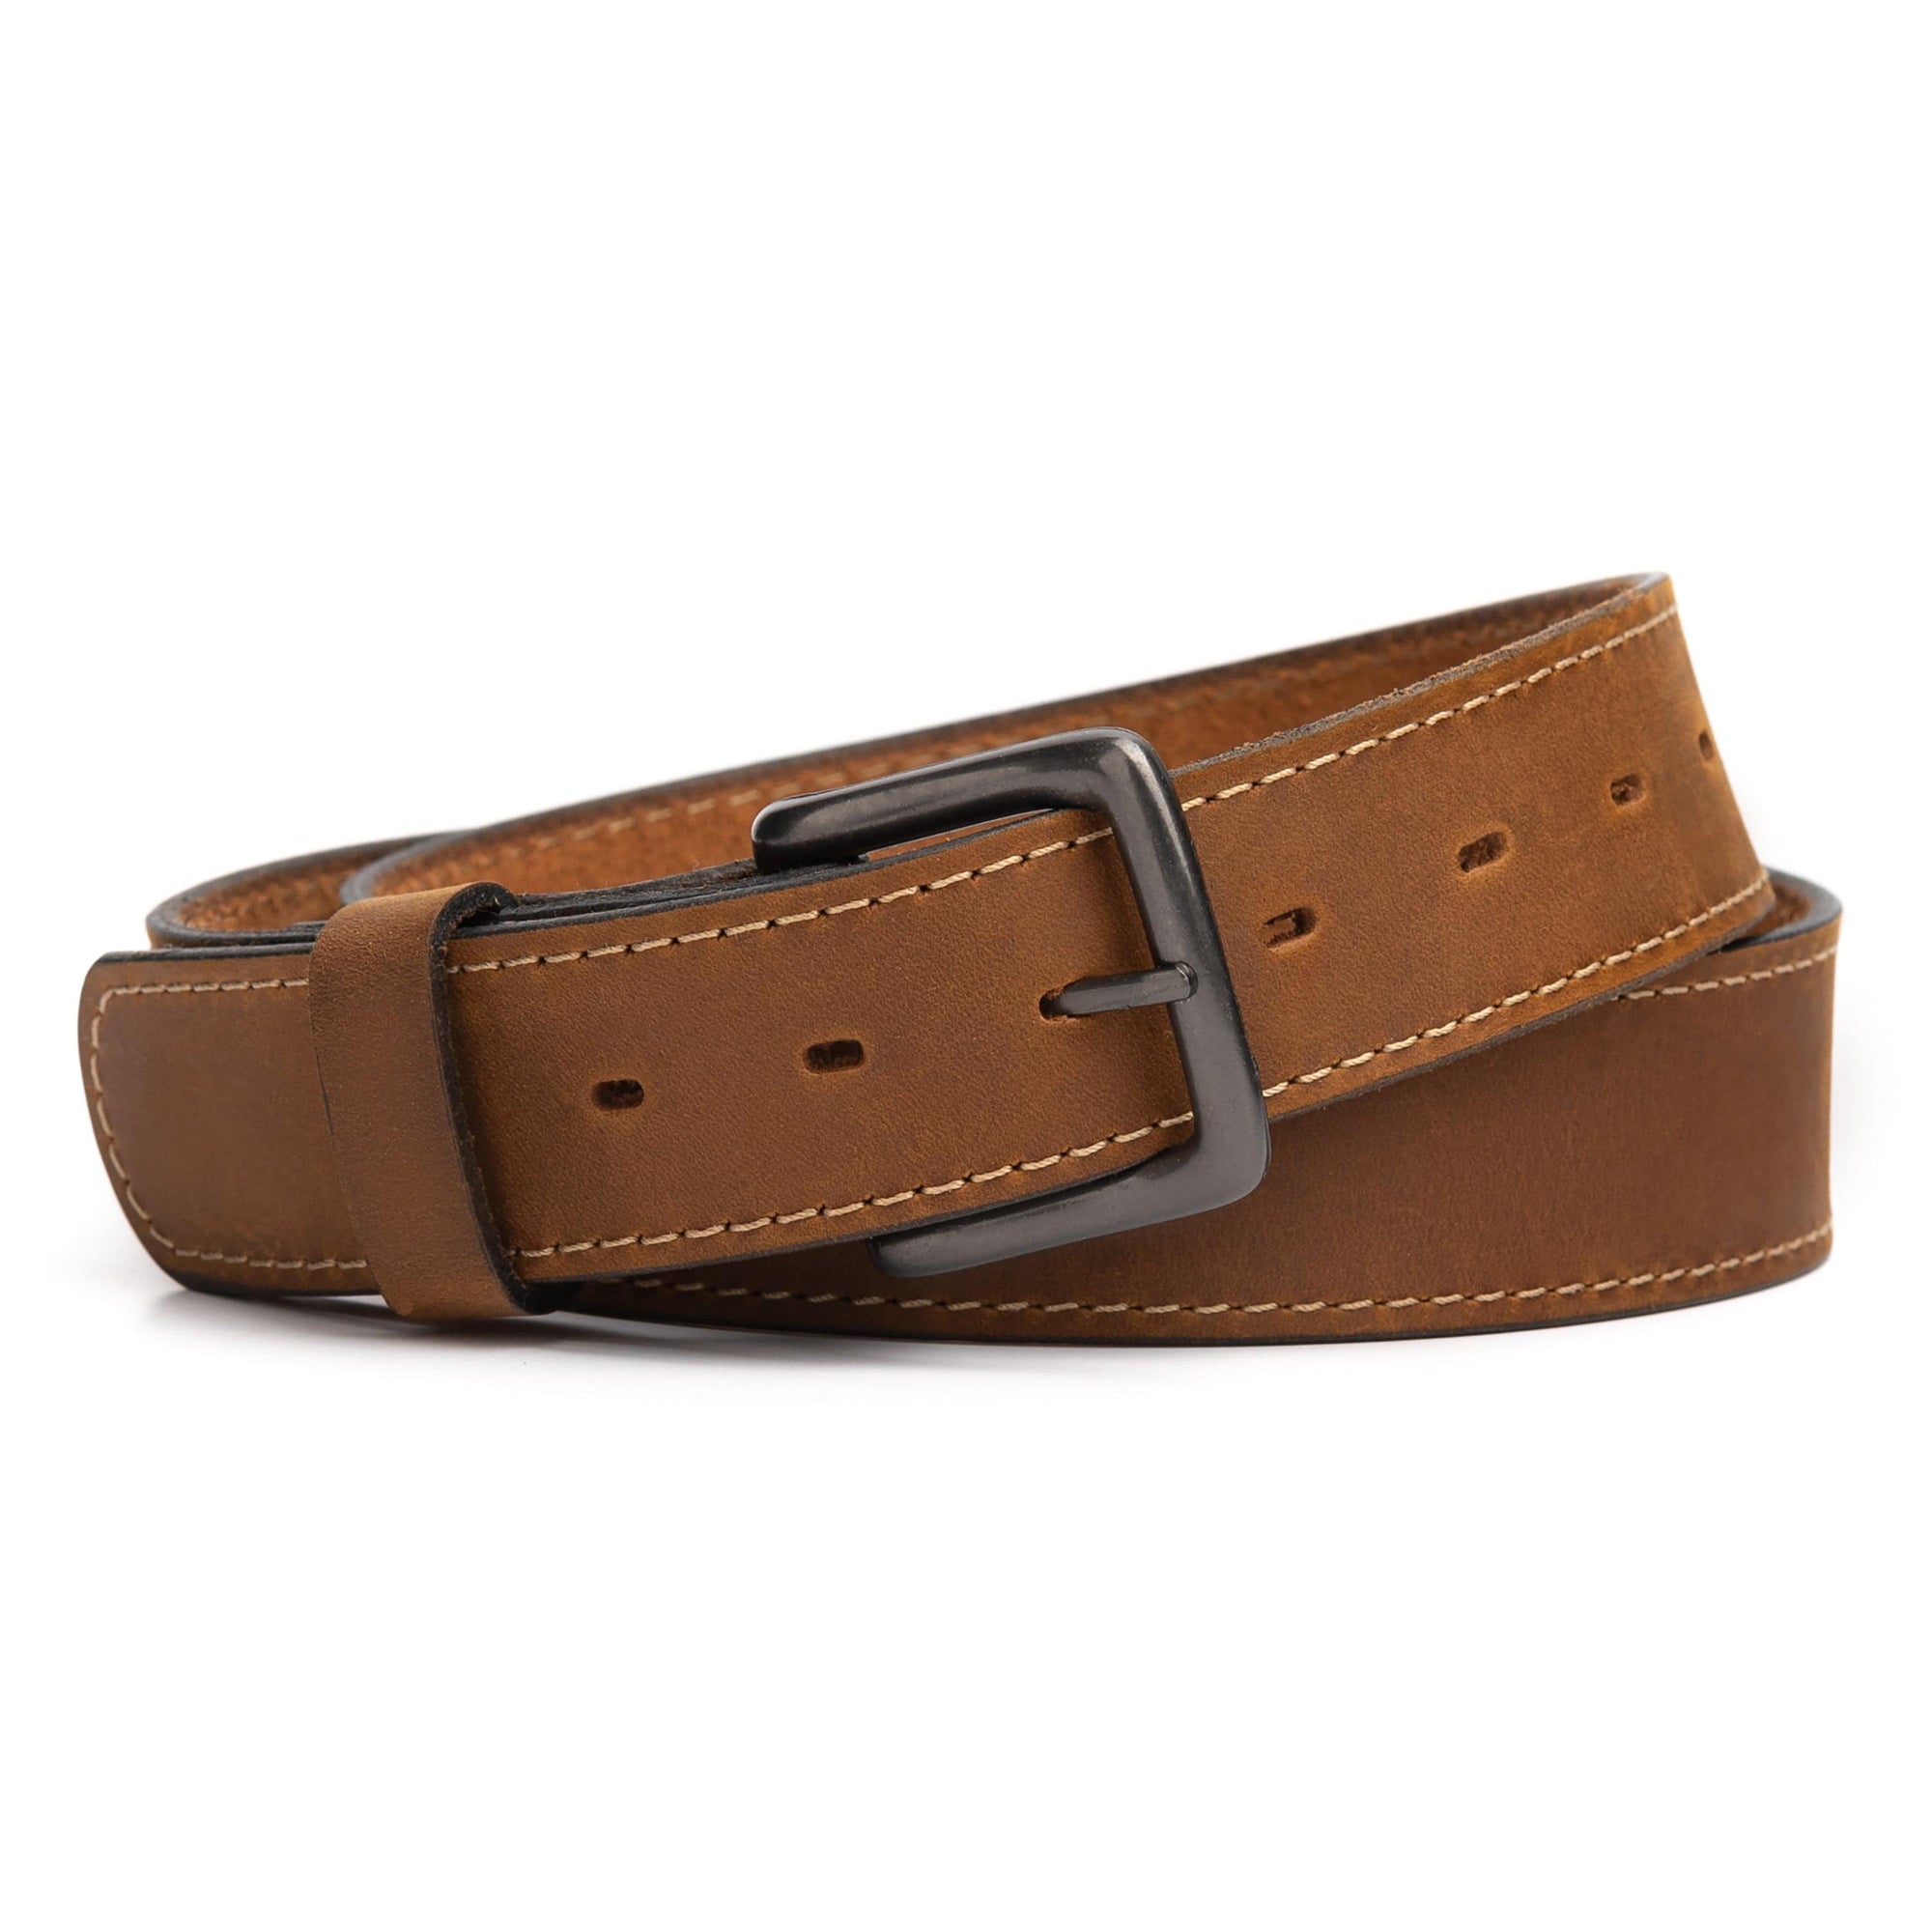 The Outrider Leather Belt - Main Street Forge